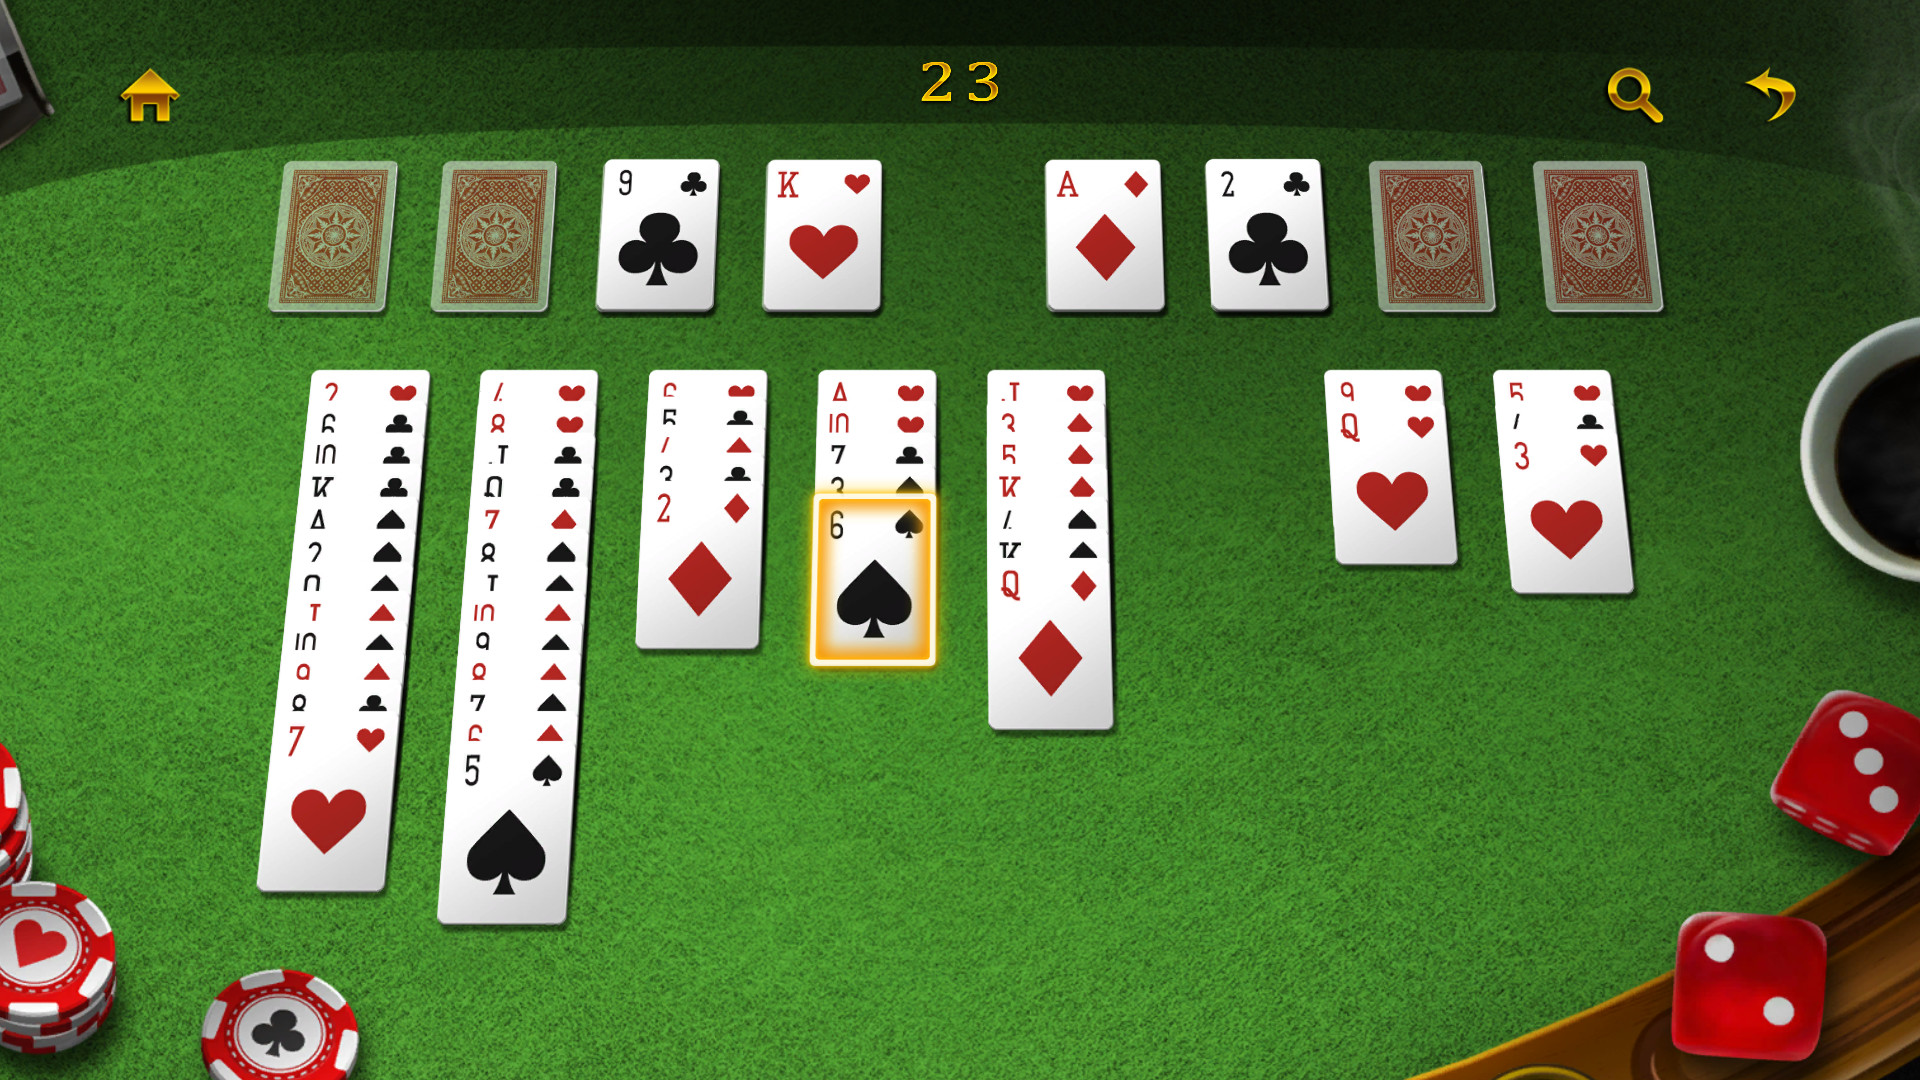 download the new version Solitaire - Casual Collection